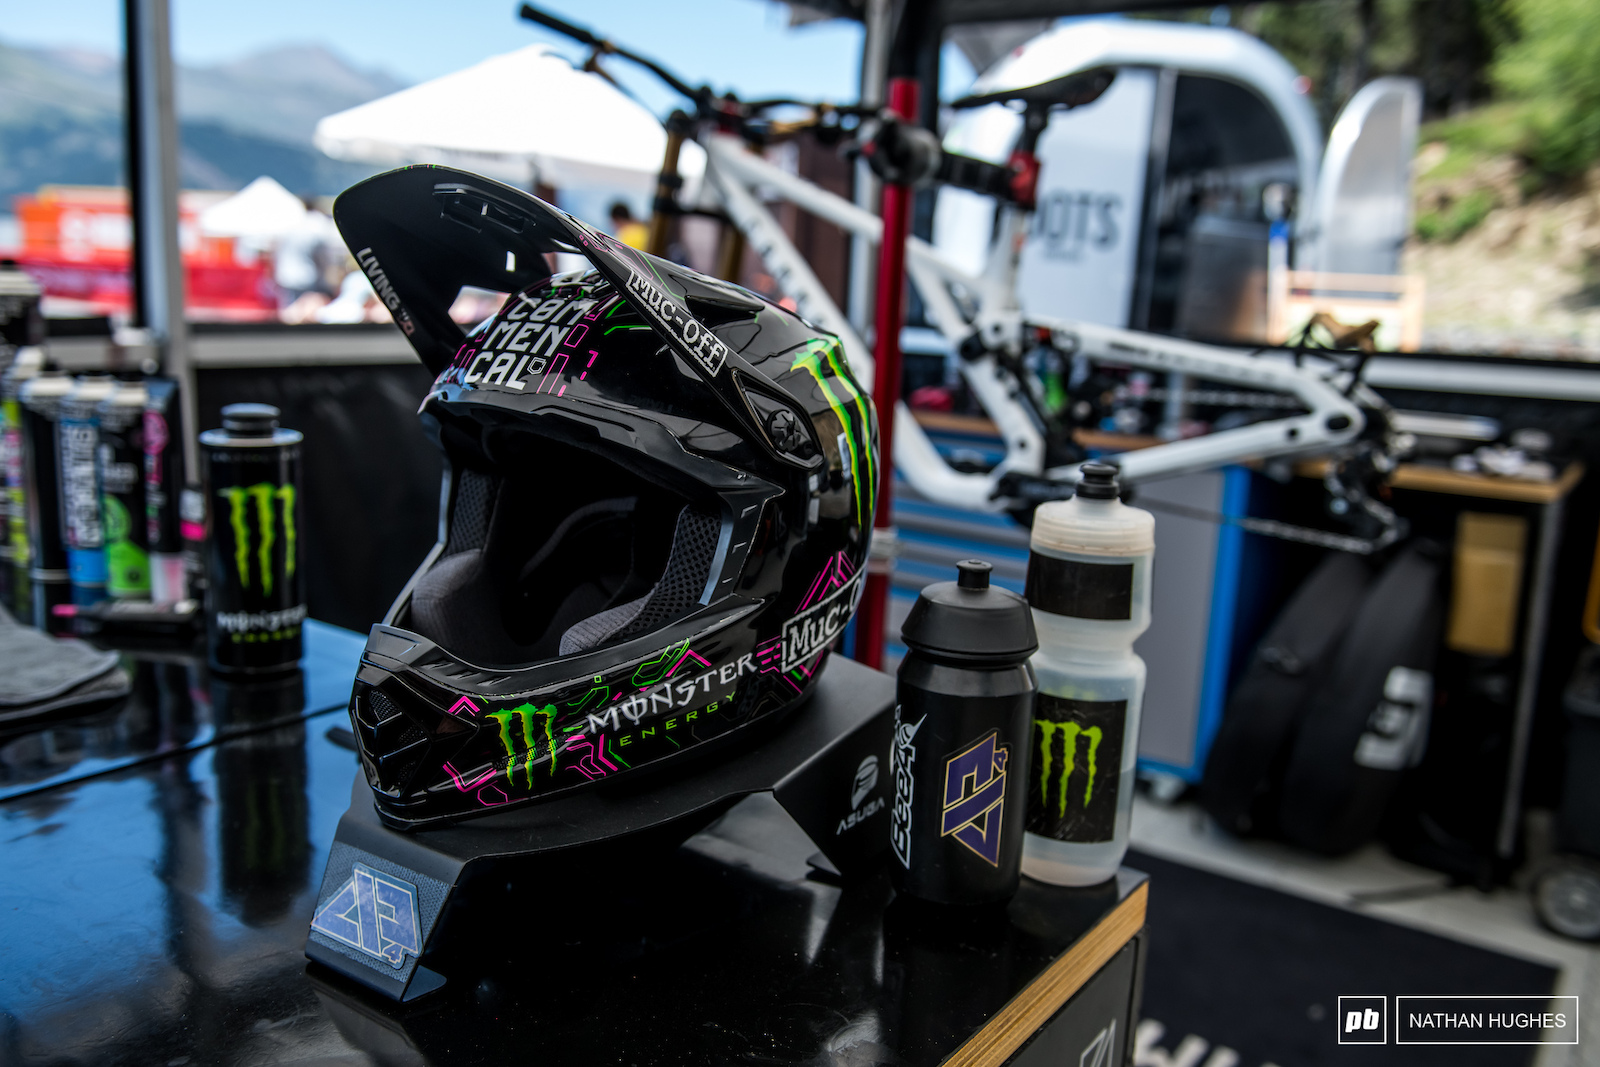 Commencal Muc-off really knocked it out of the park set-up wise with these helmet drying stands.